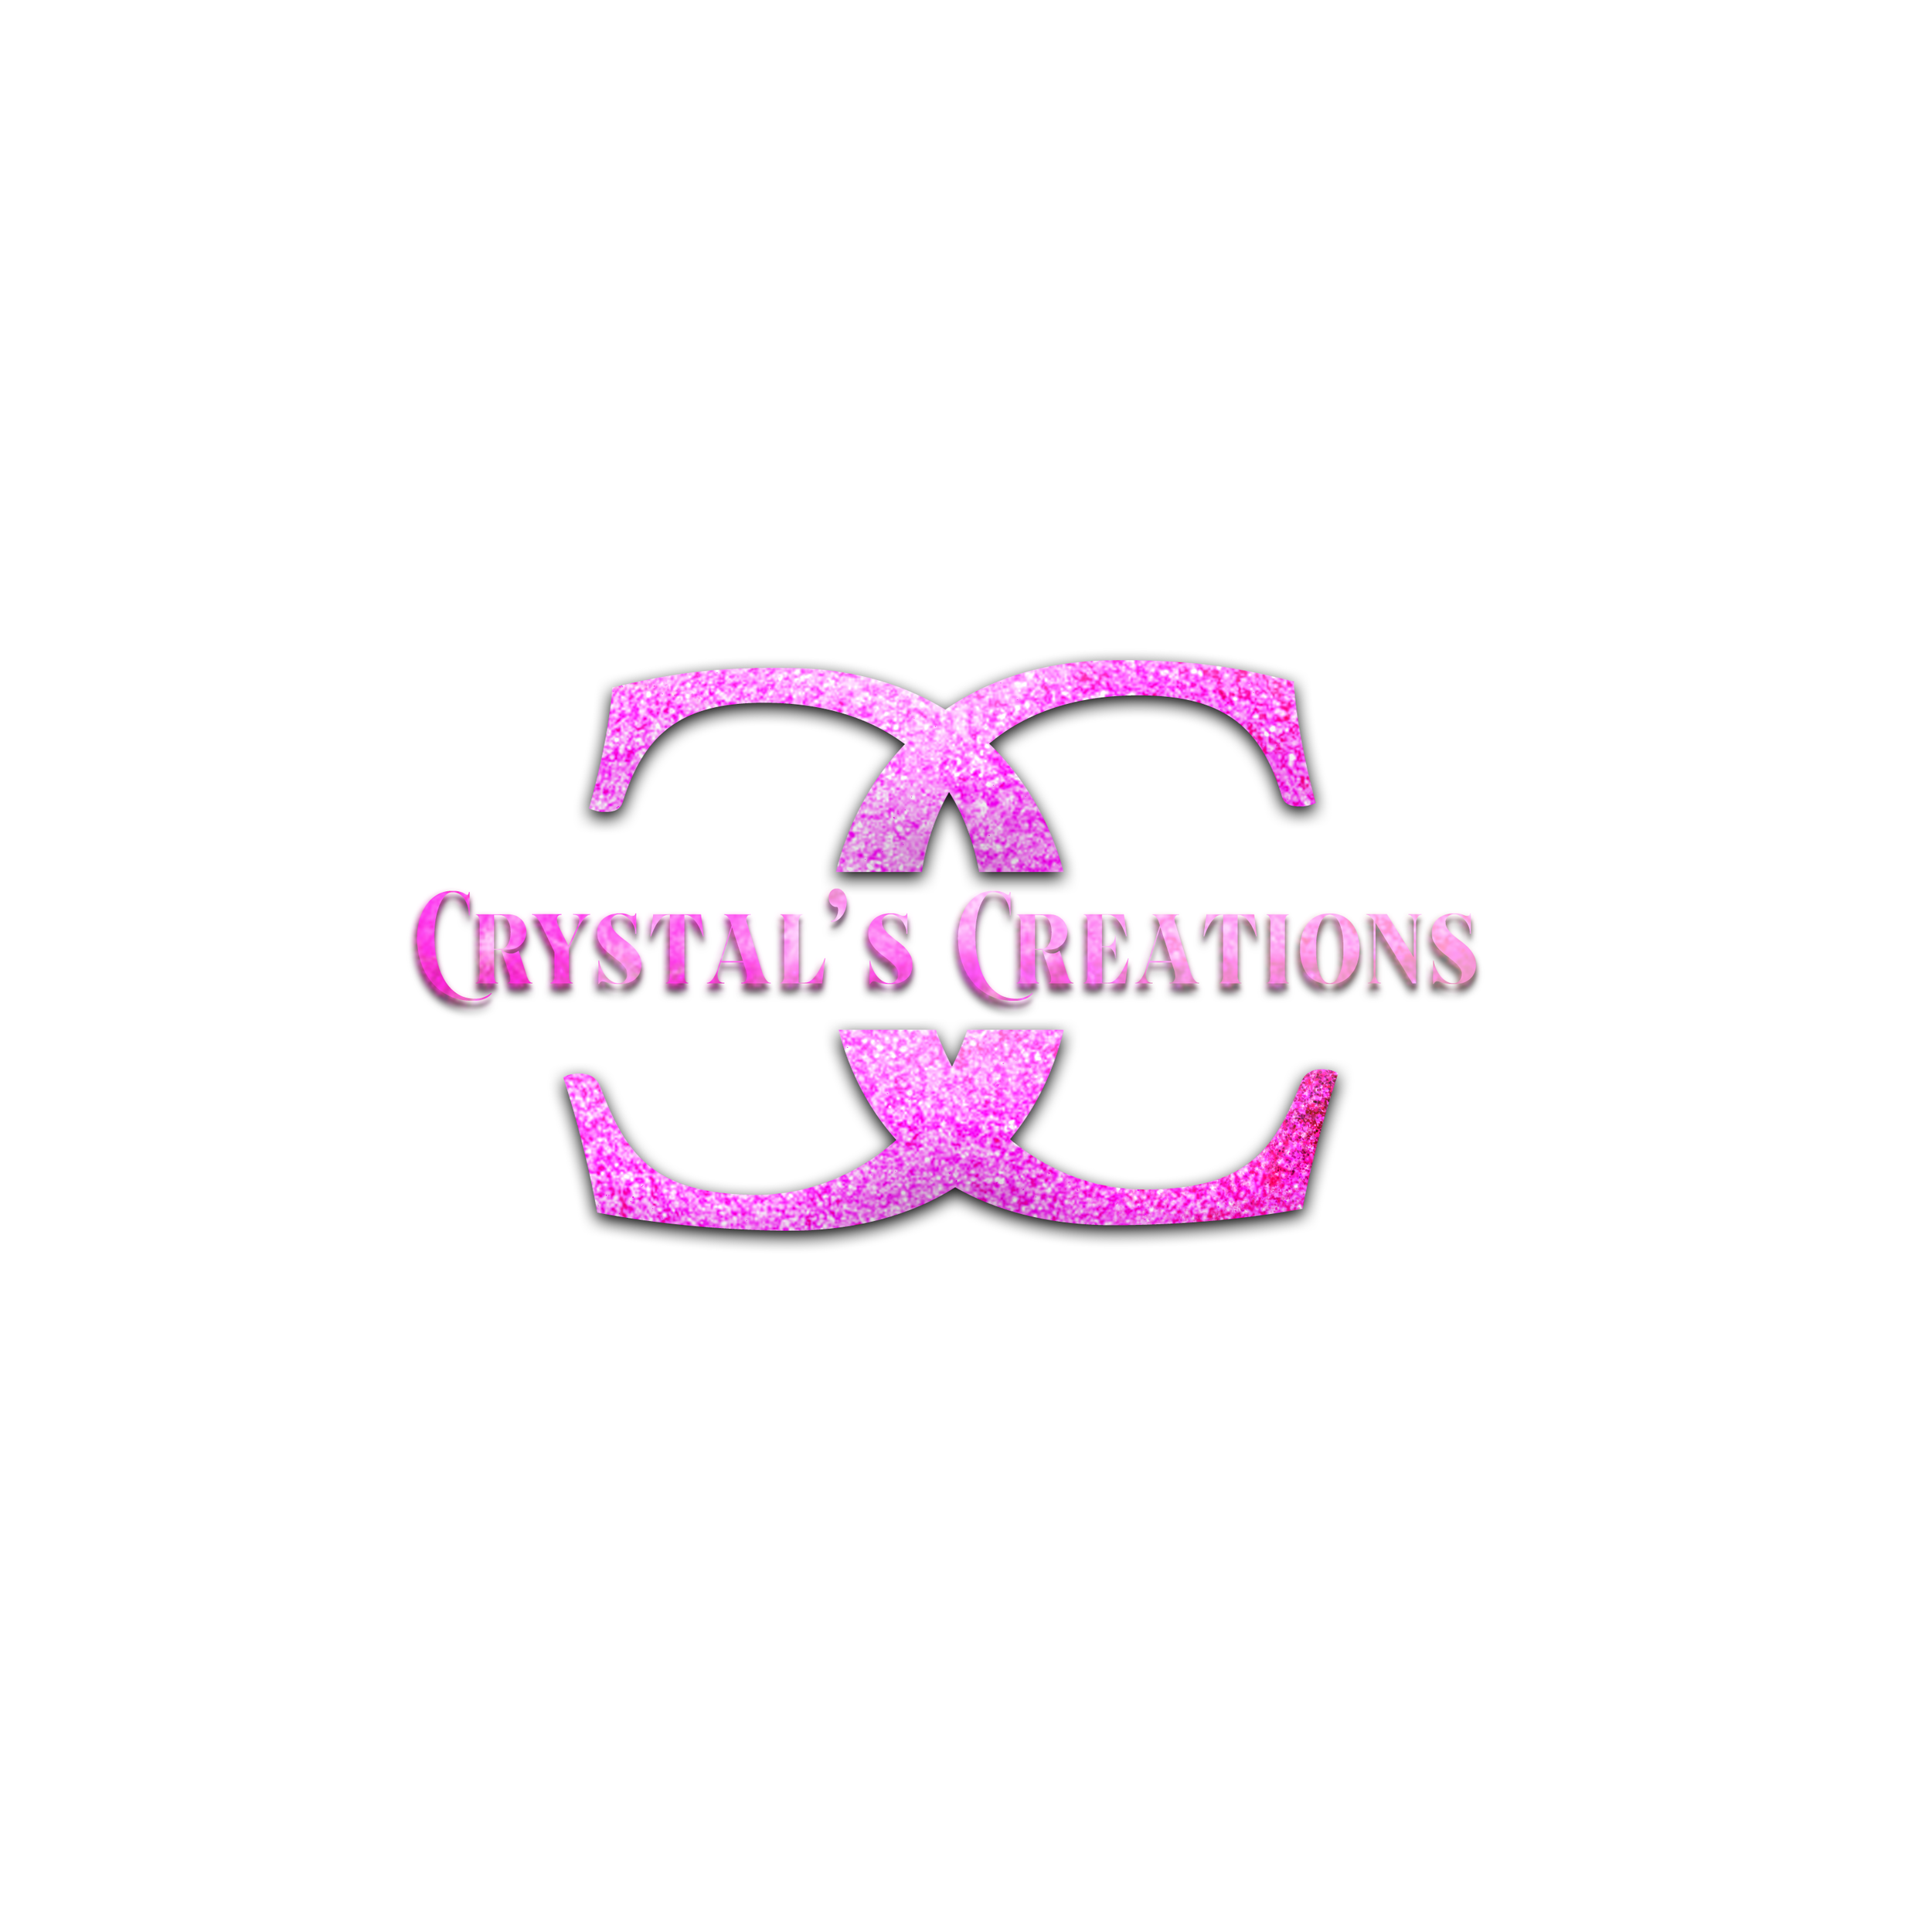 CRYSTALS CREATIONS.png